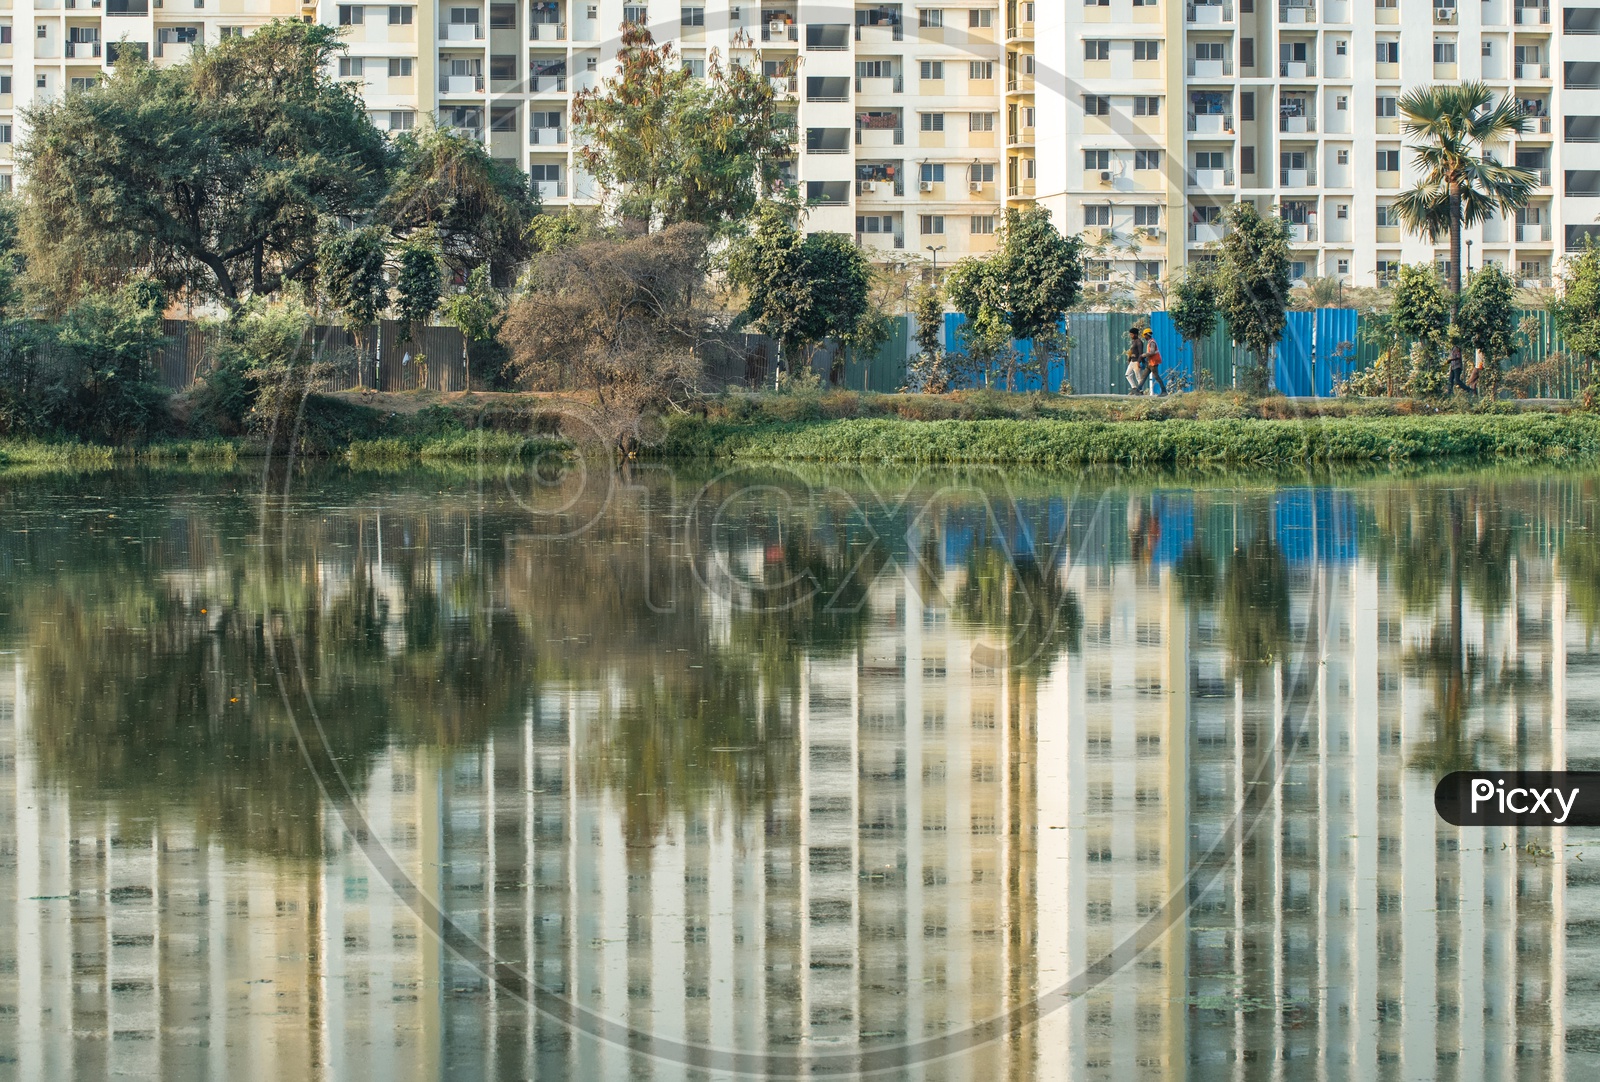 Mantri Celestia high rise apartments and its reflection on the wipro lake